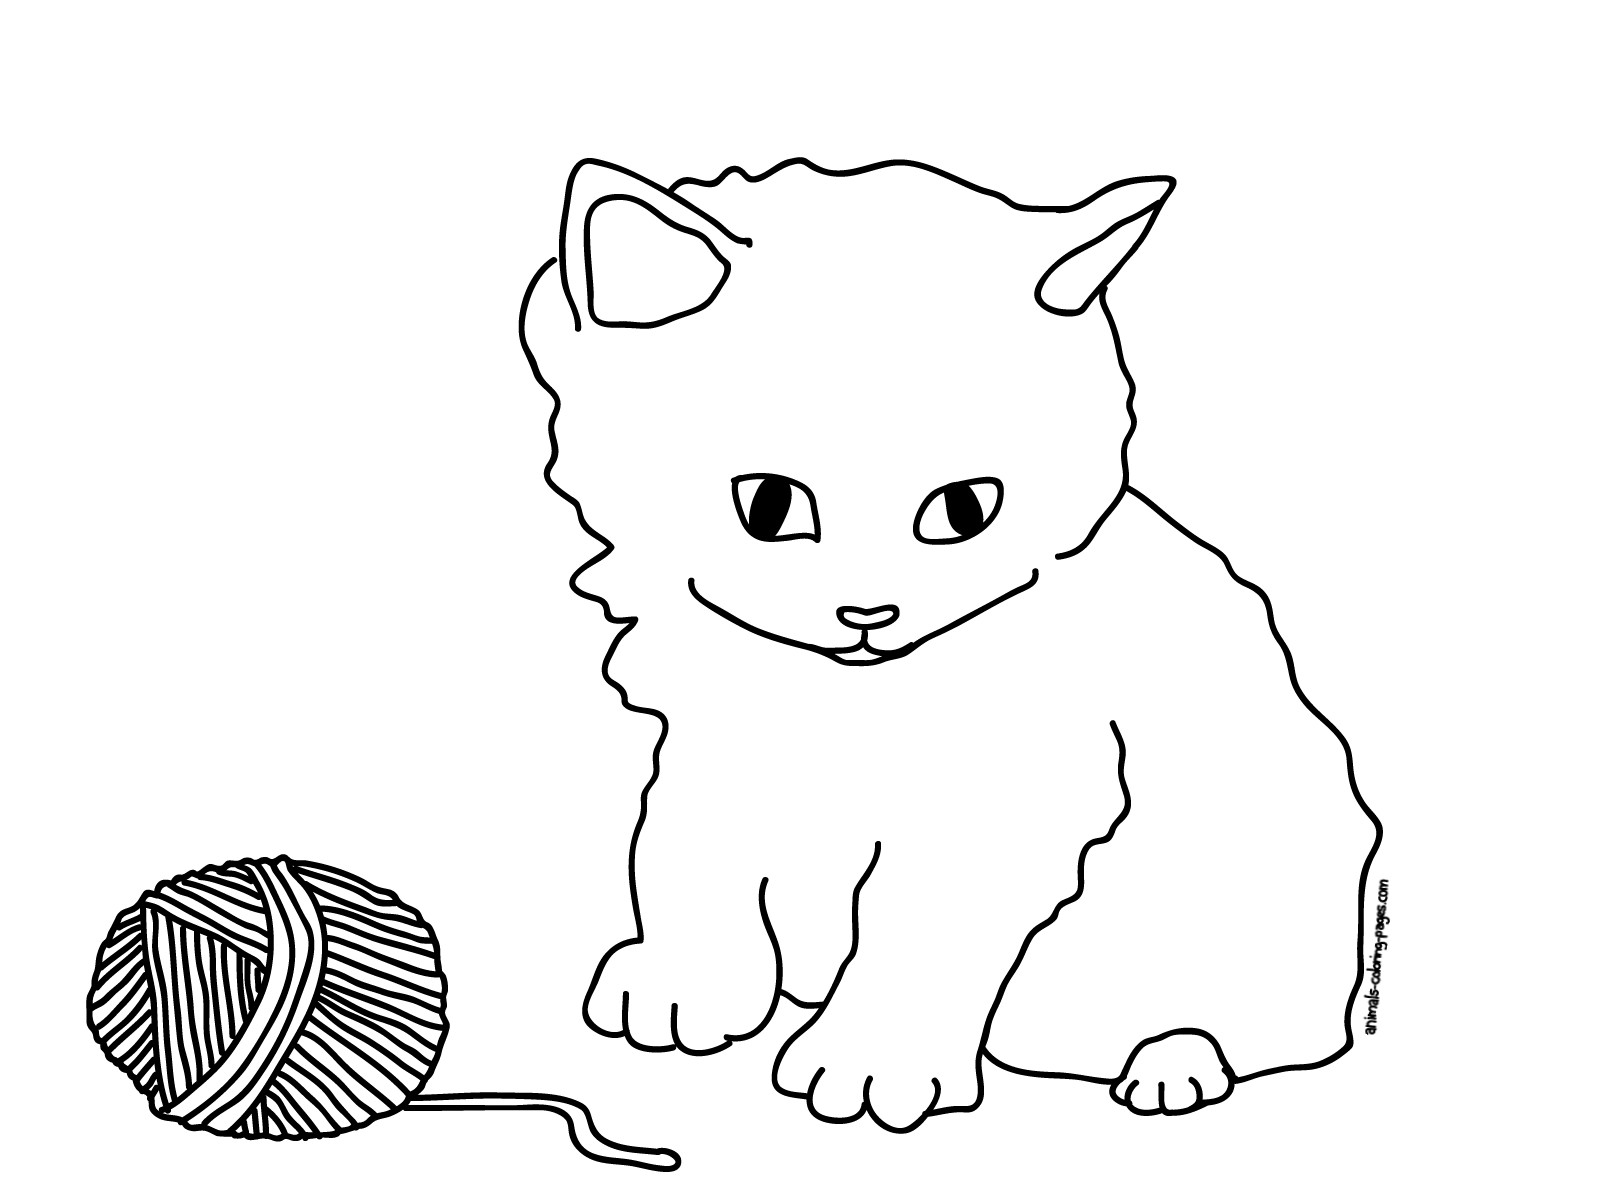 Printable Kitten Coloring Pages
 Coloring Pages Cats and Kittens Coloring Pages Free and